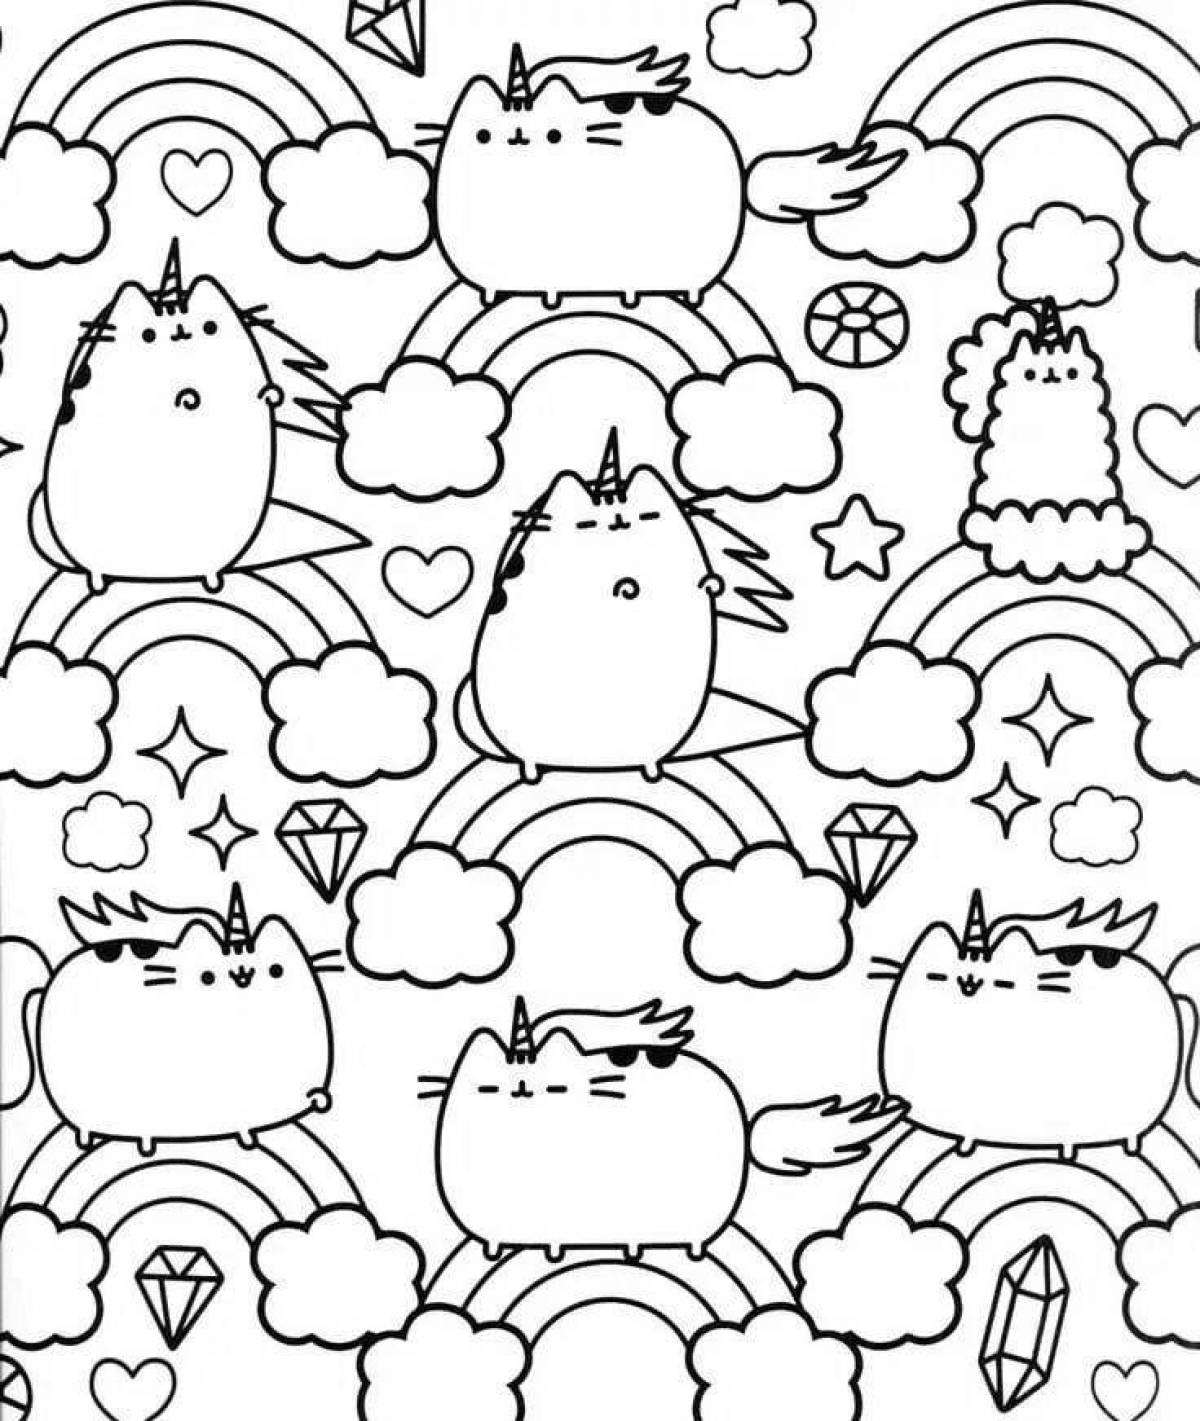 Fancy kawaii cats coloring page